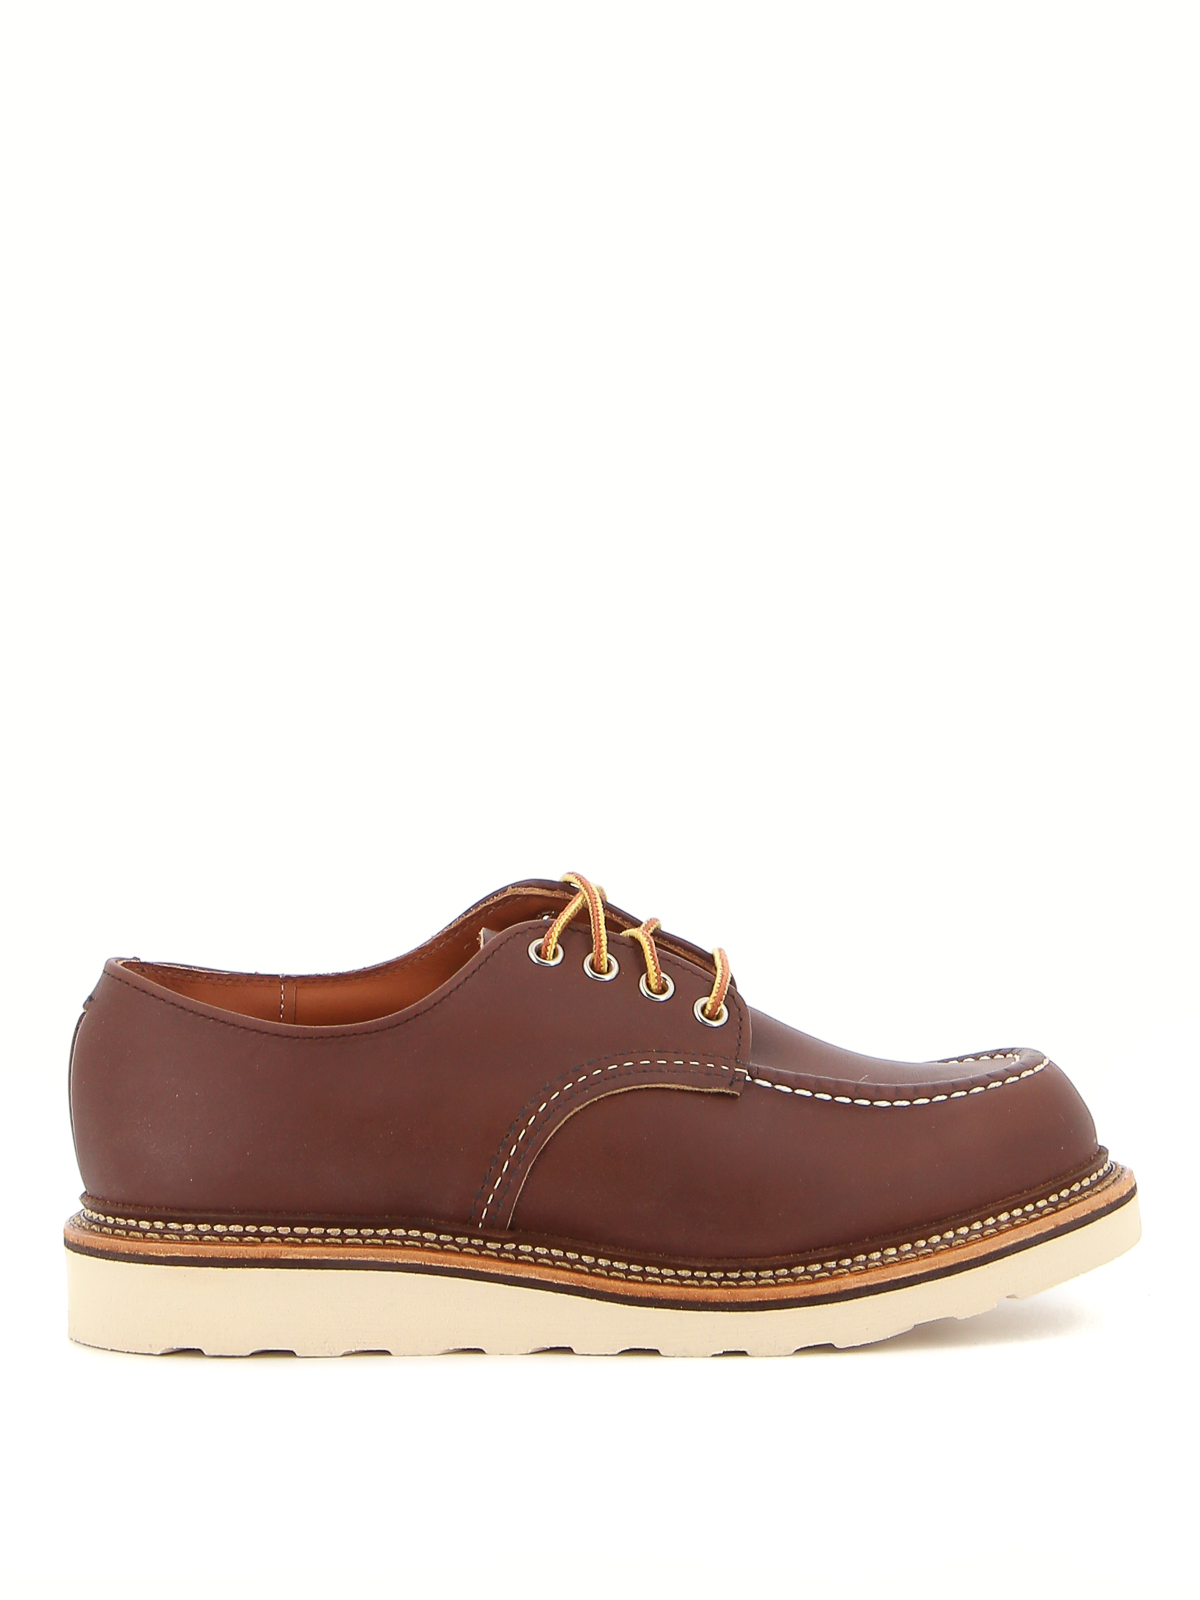 Lace-ups shoes Red Wing Shoes - Moc Toe Oxford lace-ups - 8109MAHOGANY